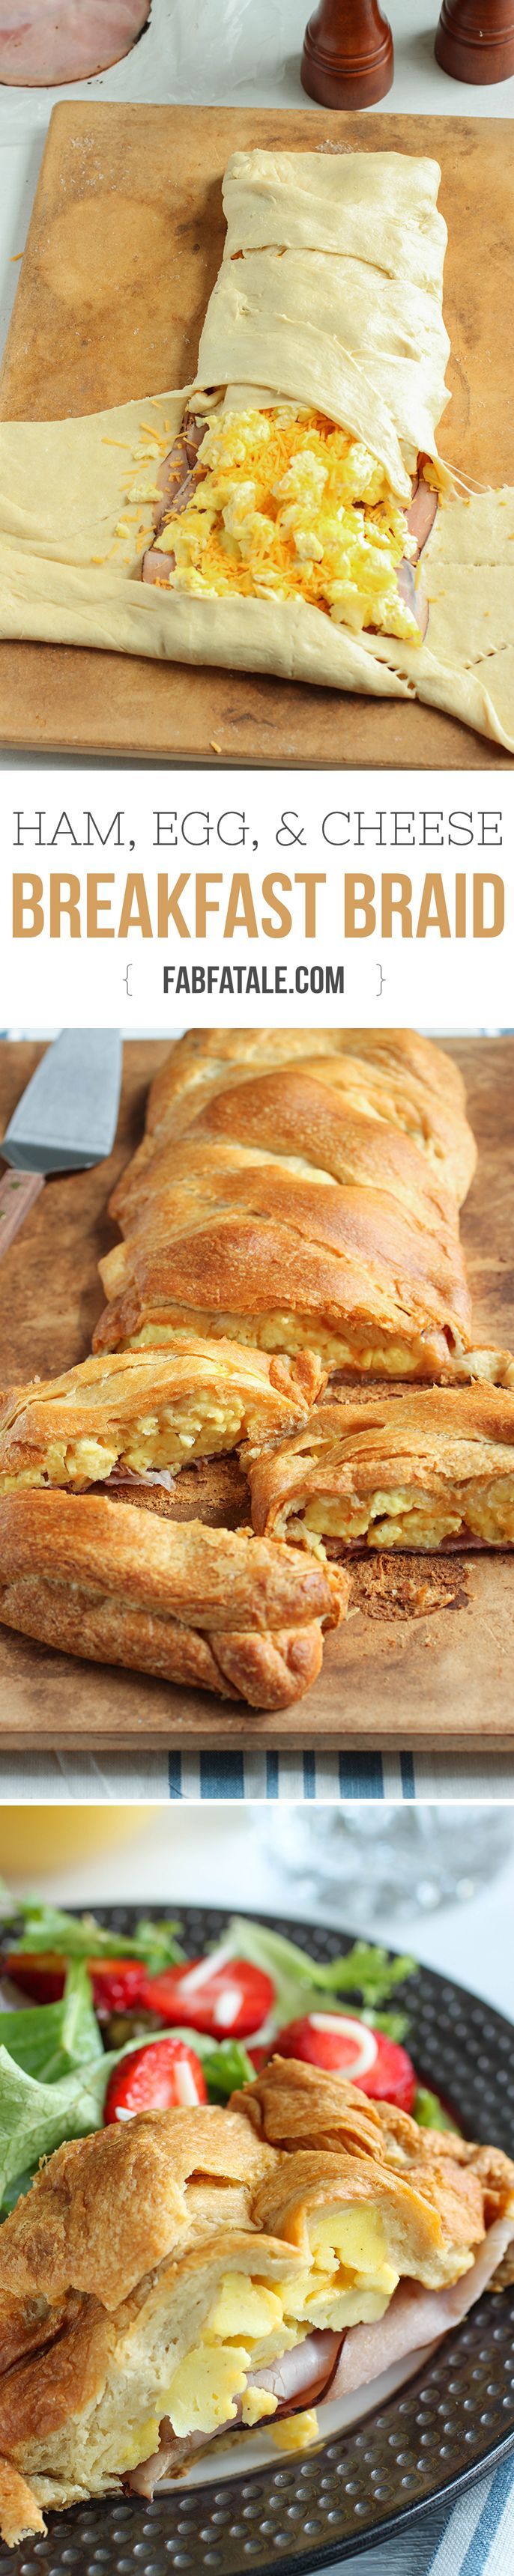 feeds a crowd and is SO good – ham, egg, and cheese croissant breakfast braid recipe #brunch